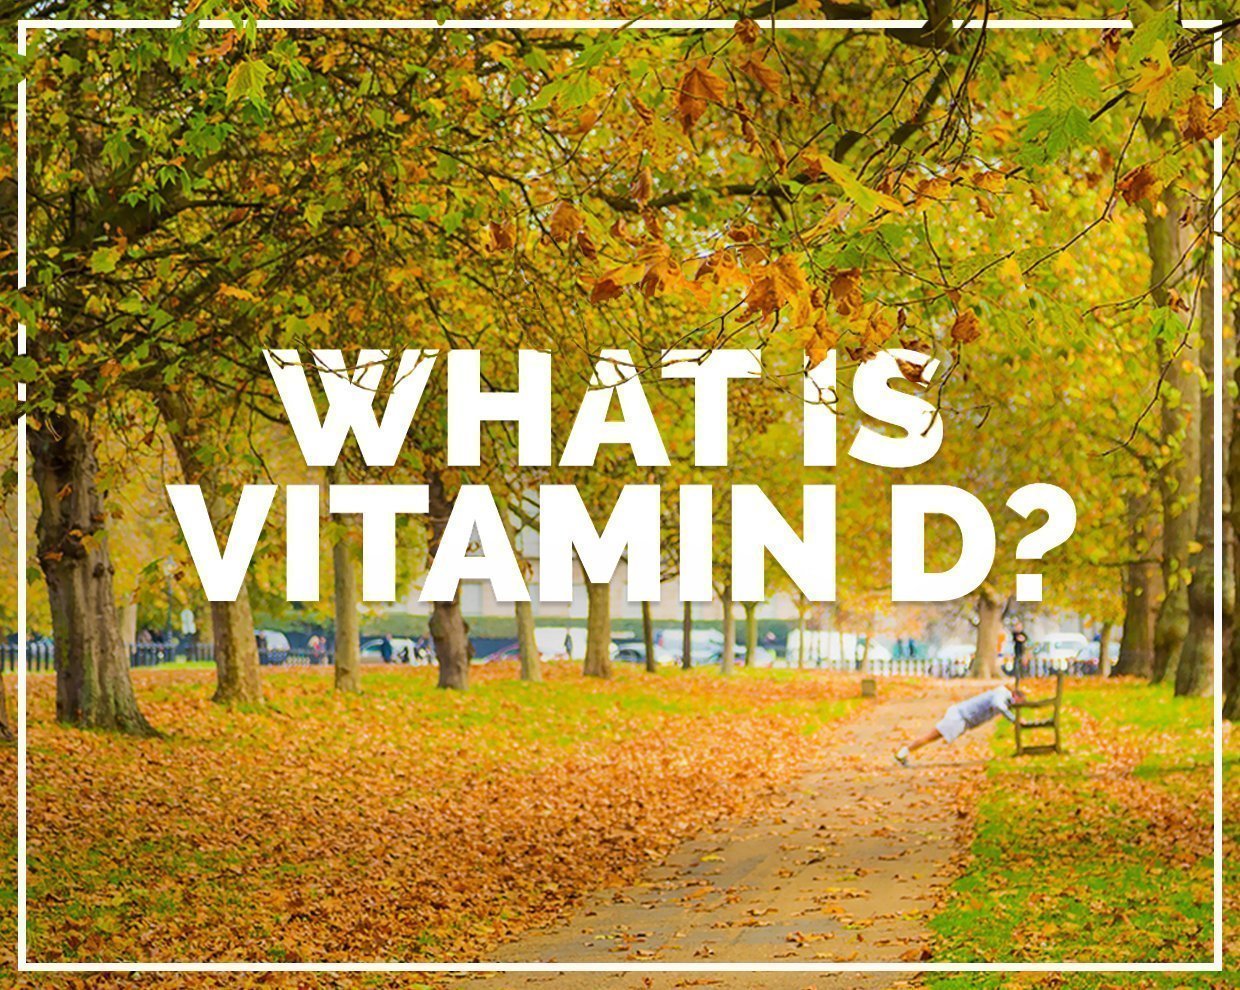 Vitamin D - are you deficient? 